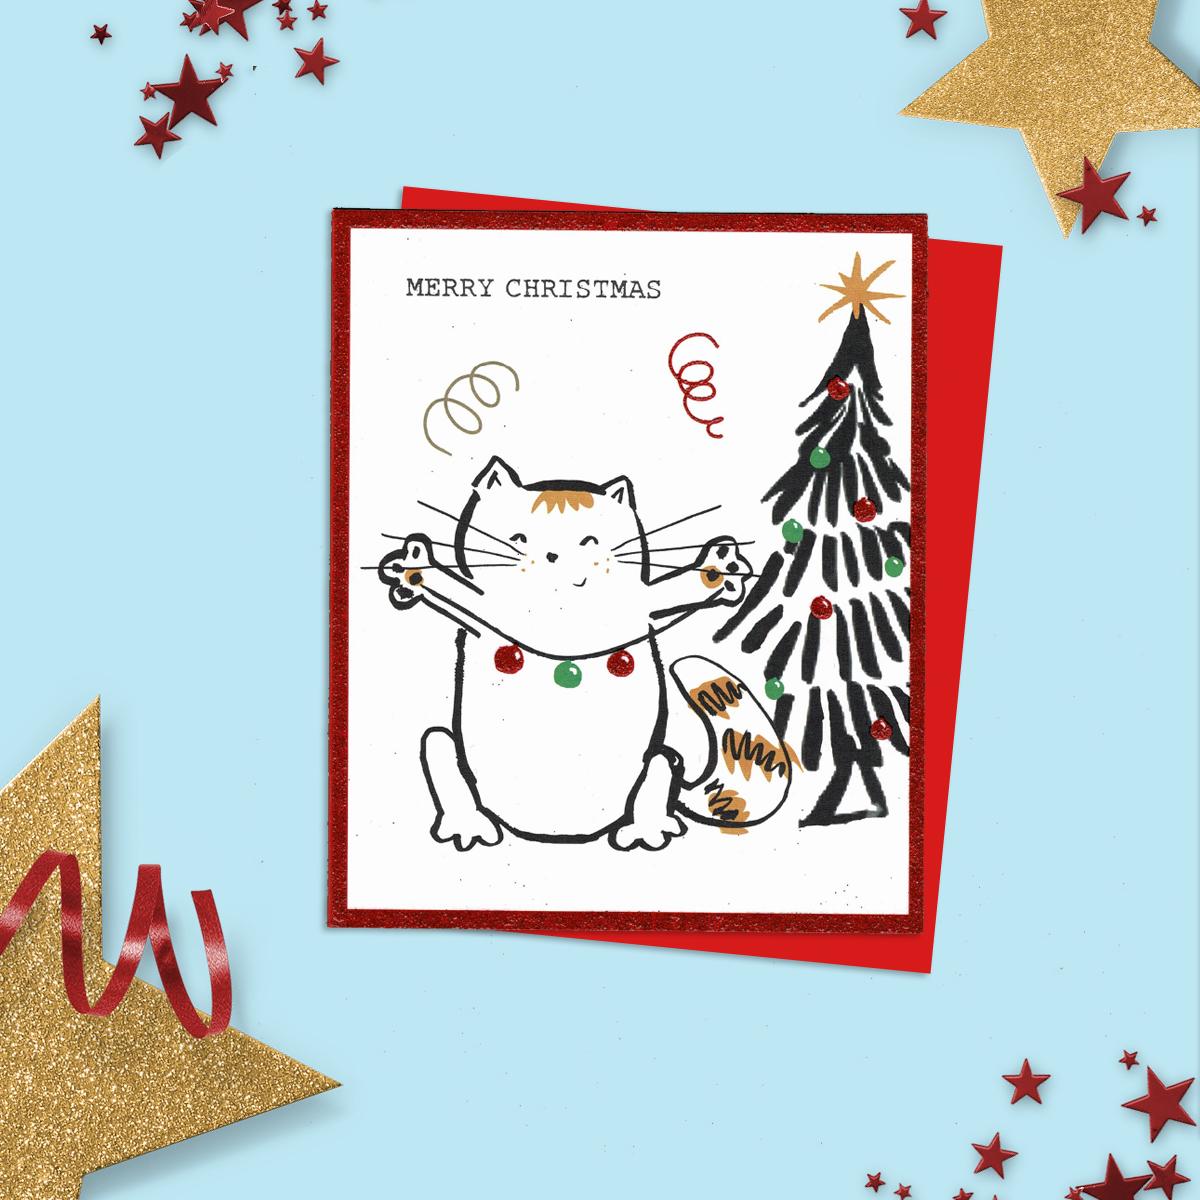 General Christmas Card Featuring A Doodled Cat with Christmas Tree And Lights. Added Red Glitter And Envelope To Complete